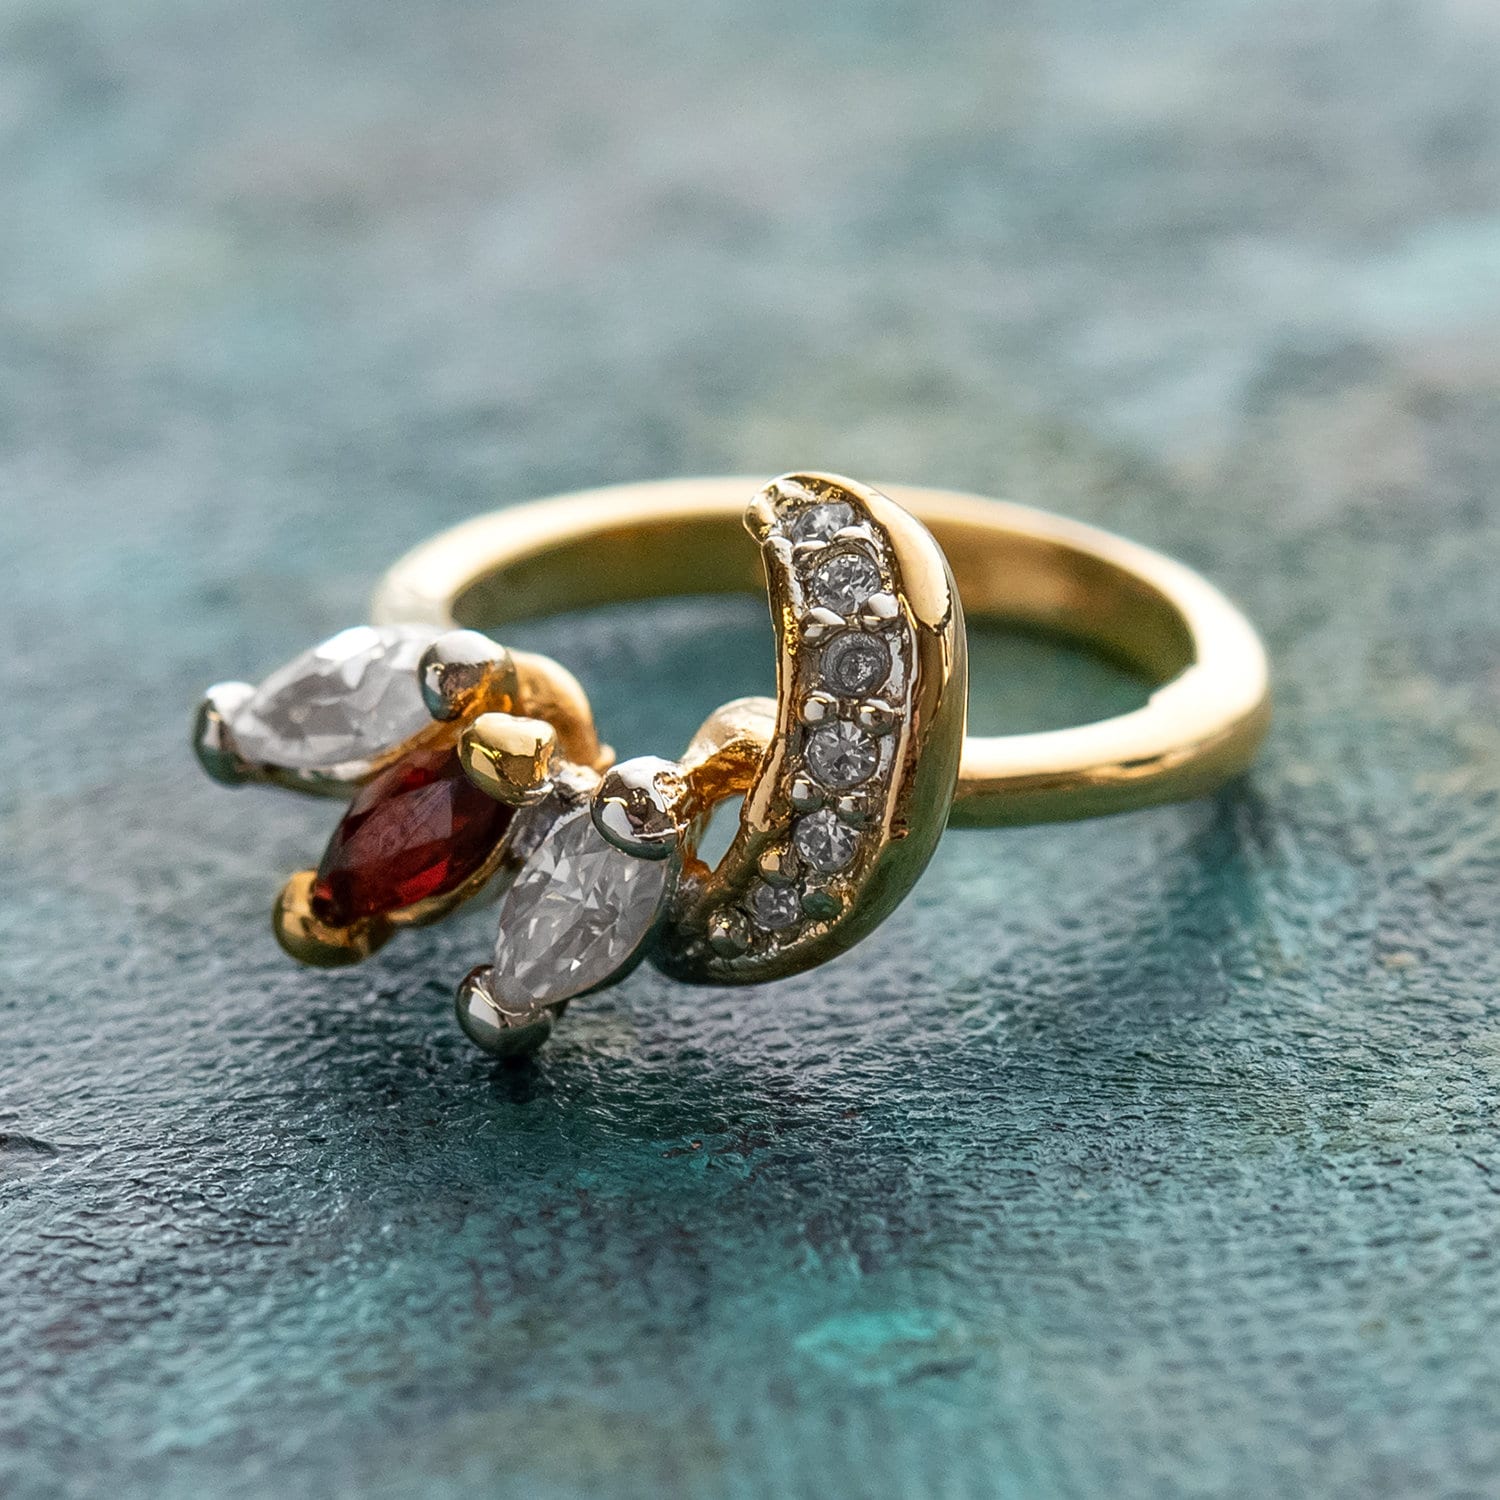 Vintage Womens Ring Genuine Garnet and Crystals 18kt Gold Engagement Wedding Band January Birth Stone